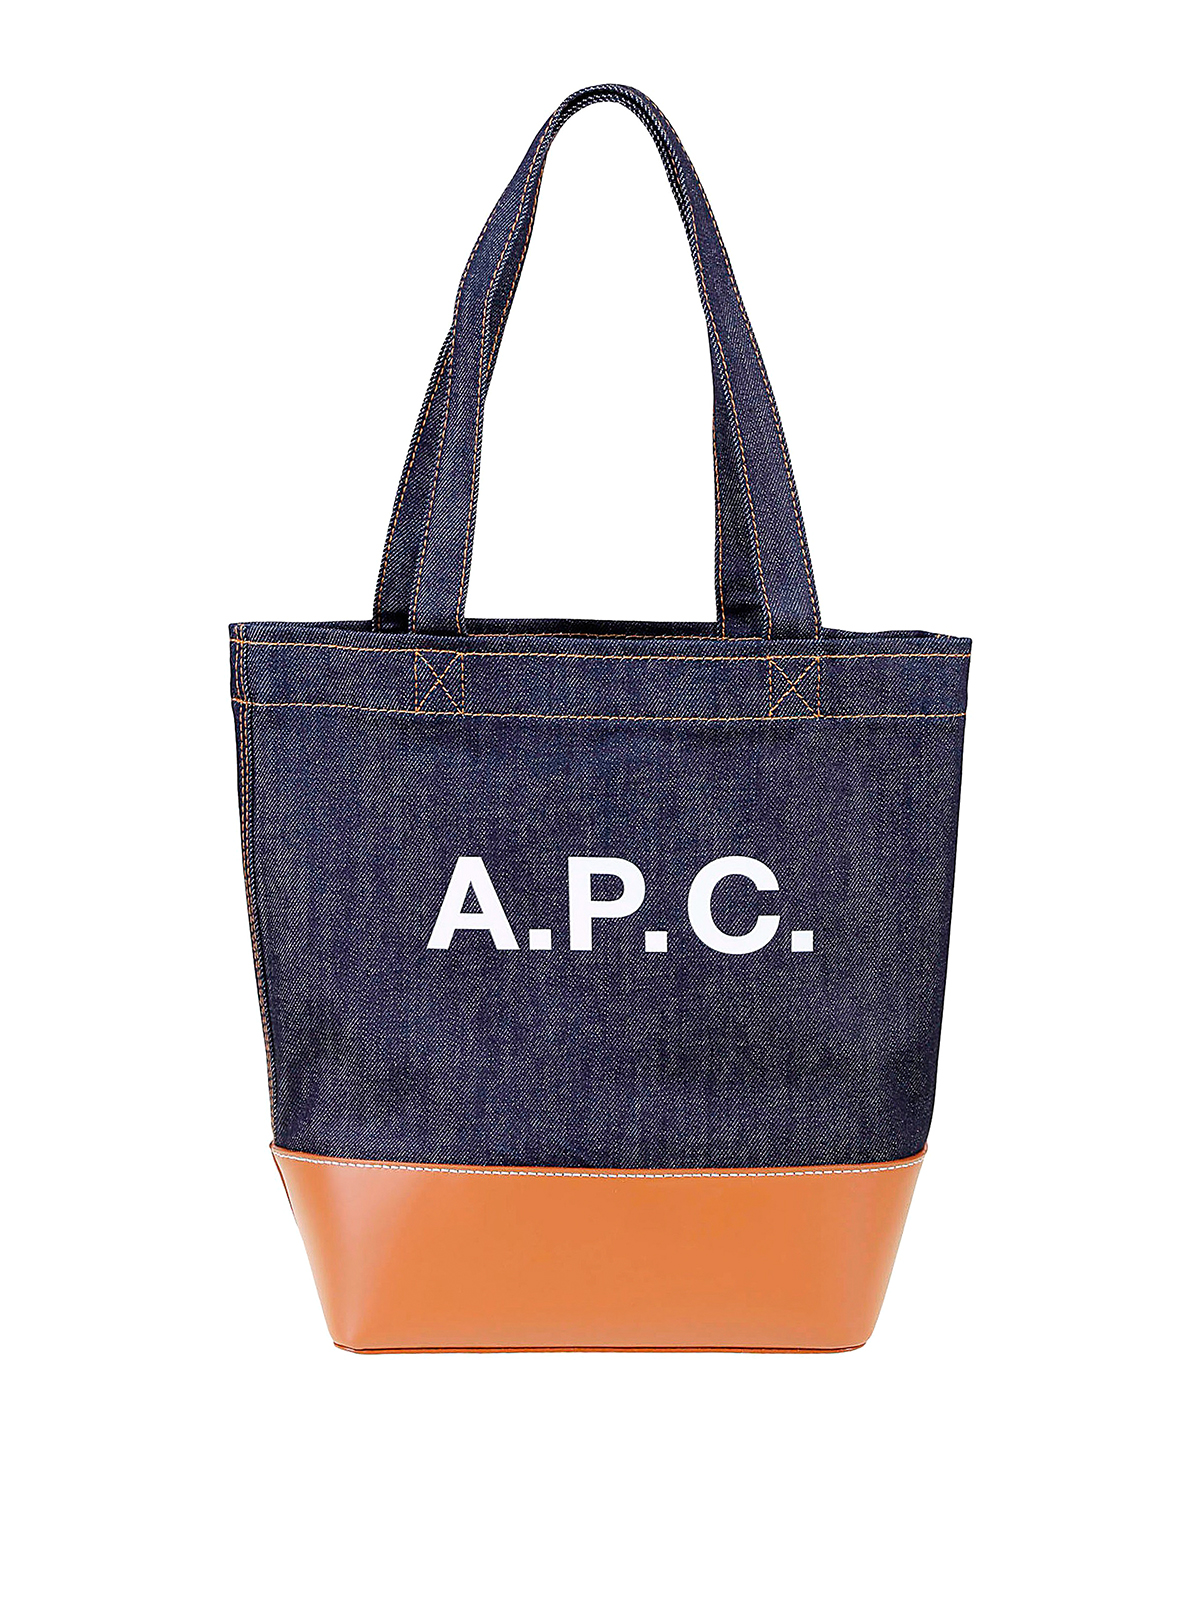 Totes bags A.P.C. - Axel small tote - CODDPM61568CAF